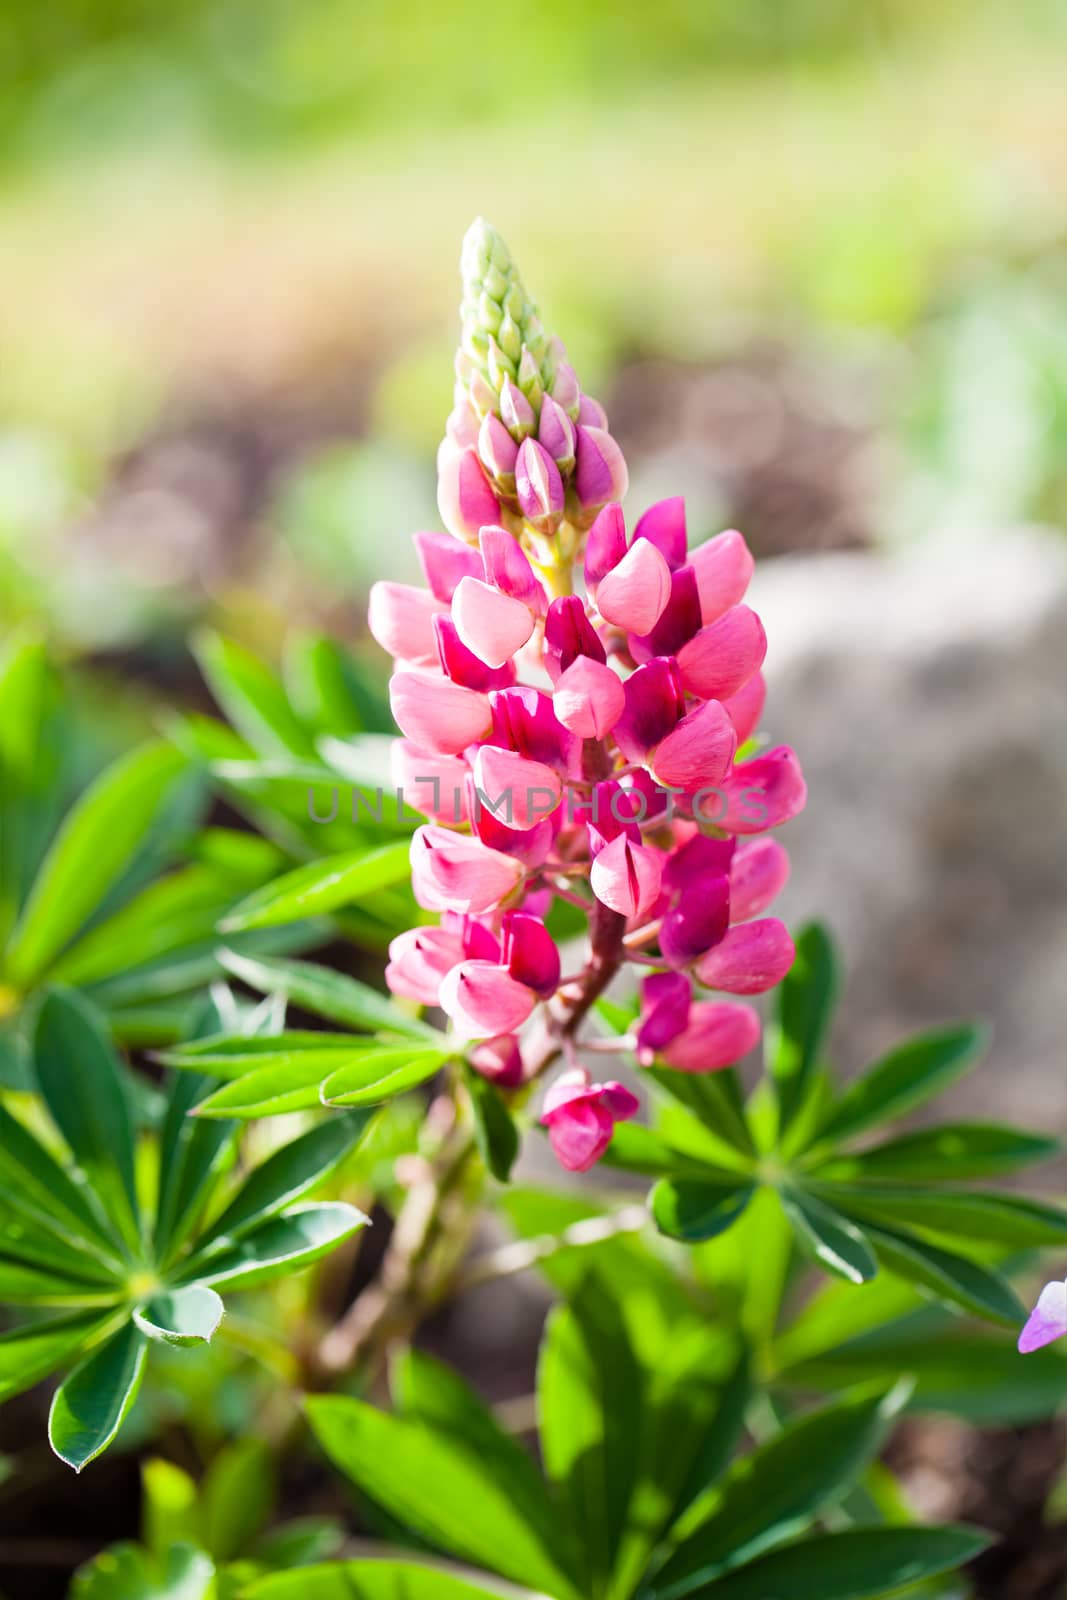 Rare pink Lupin flower (Lupinus) in the summer by motorolka